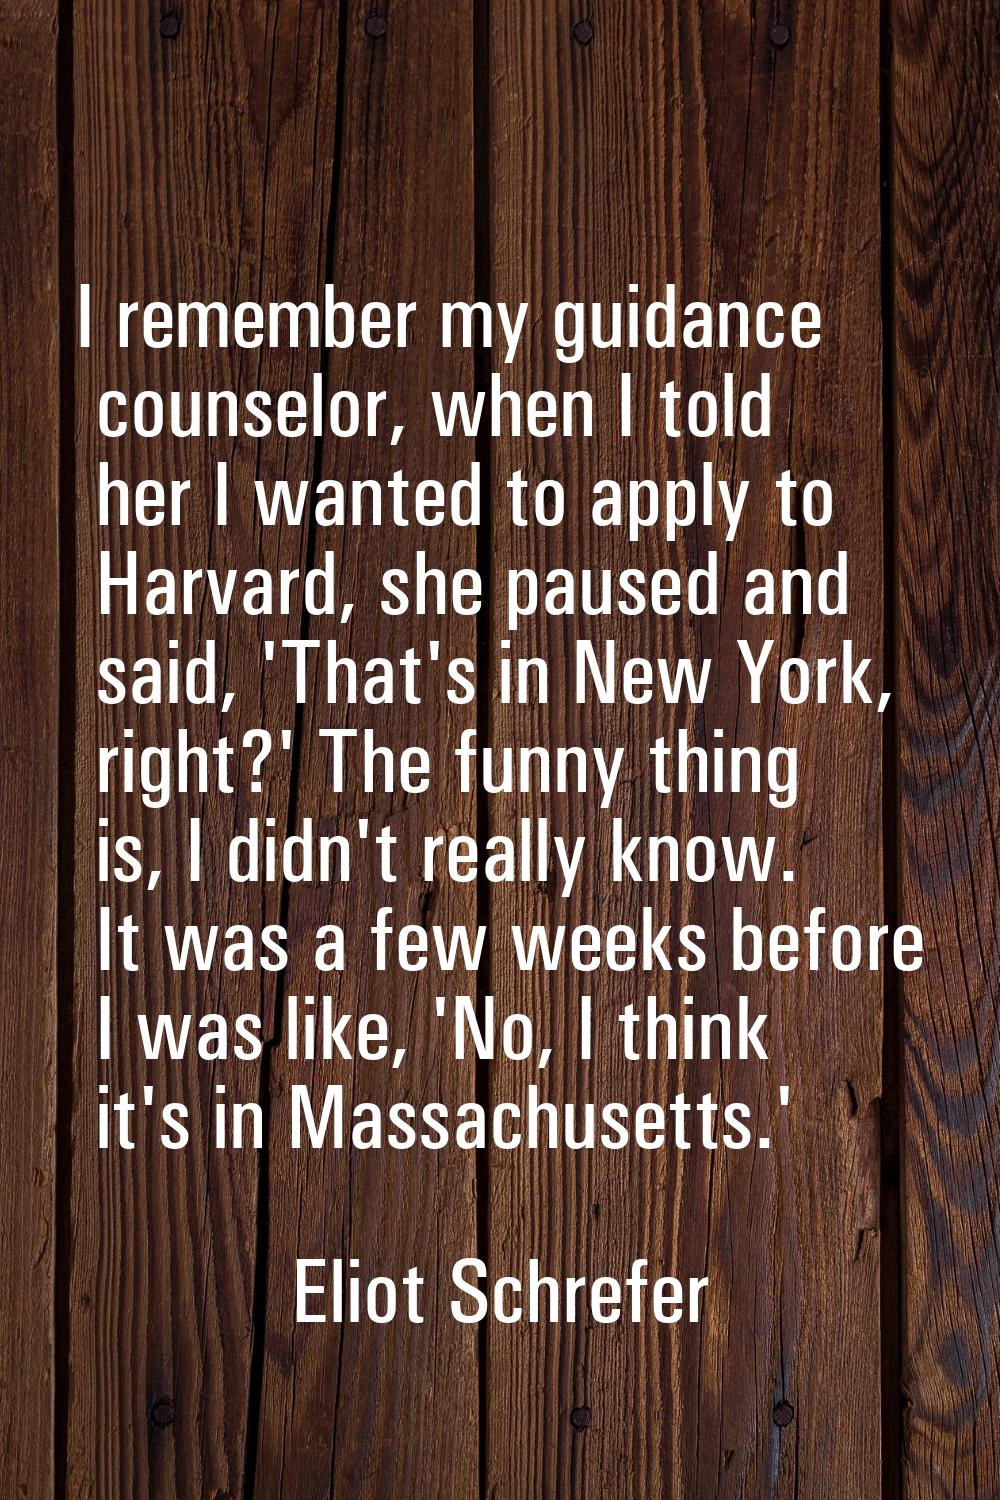 I remember my guidance counselor, when I told her I wanted to apply to Harvard, she paused and said